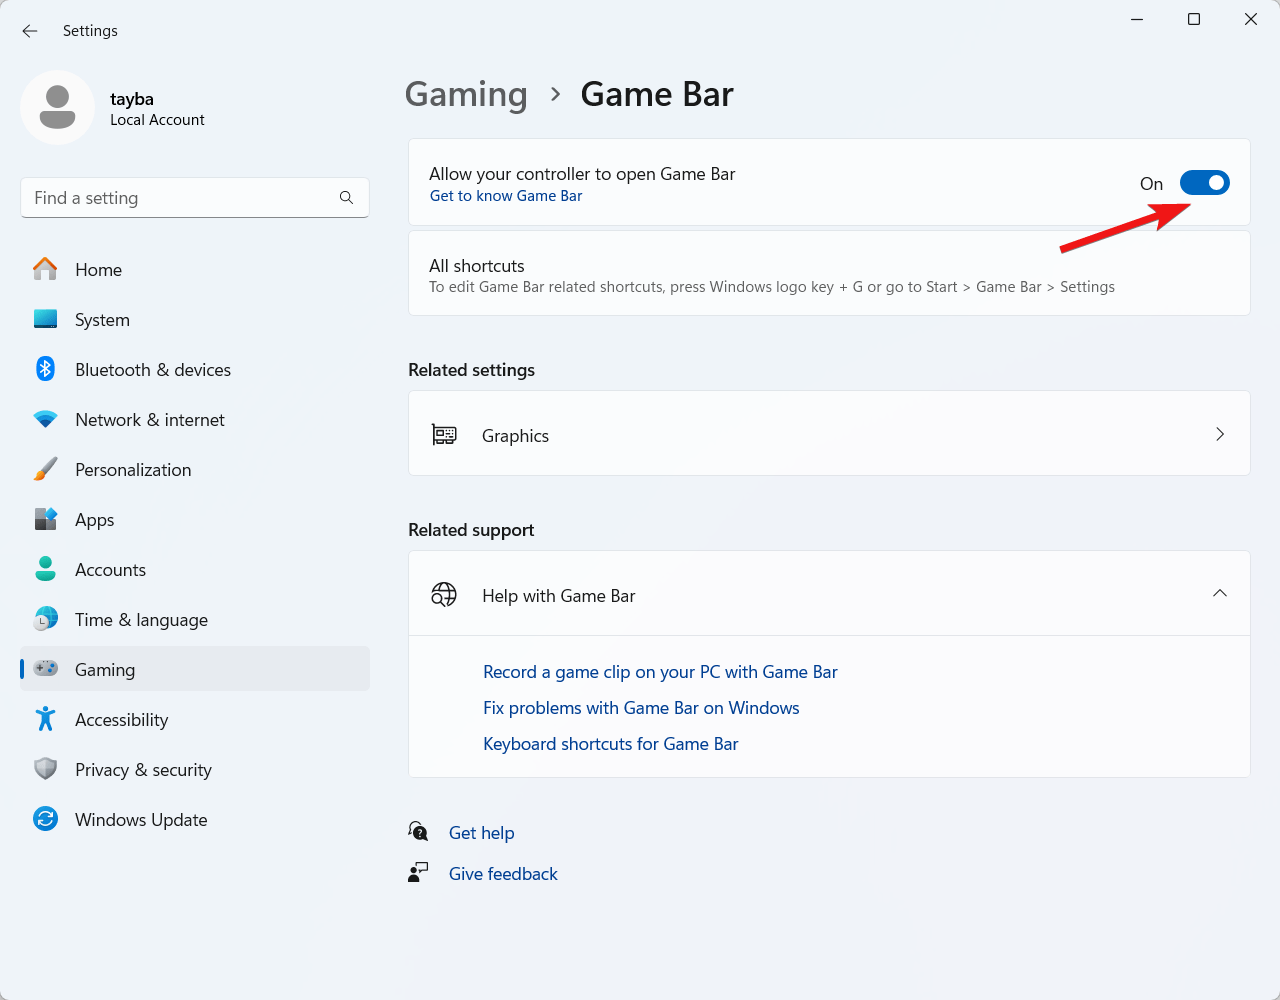 Enable the toggle for allow your controller to open Game Bar